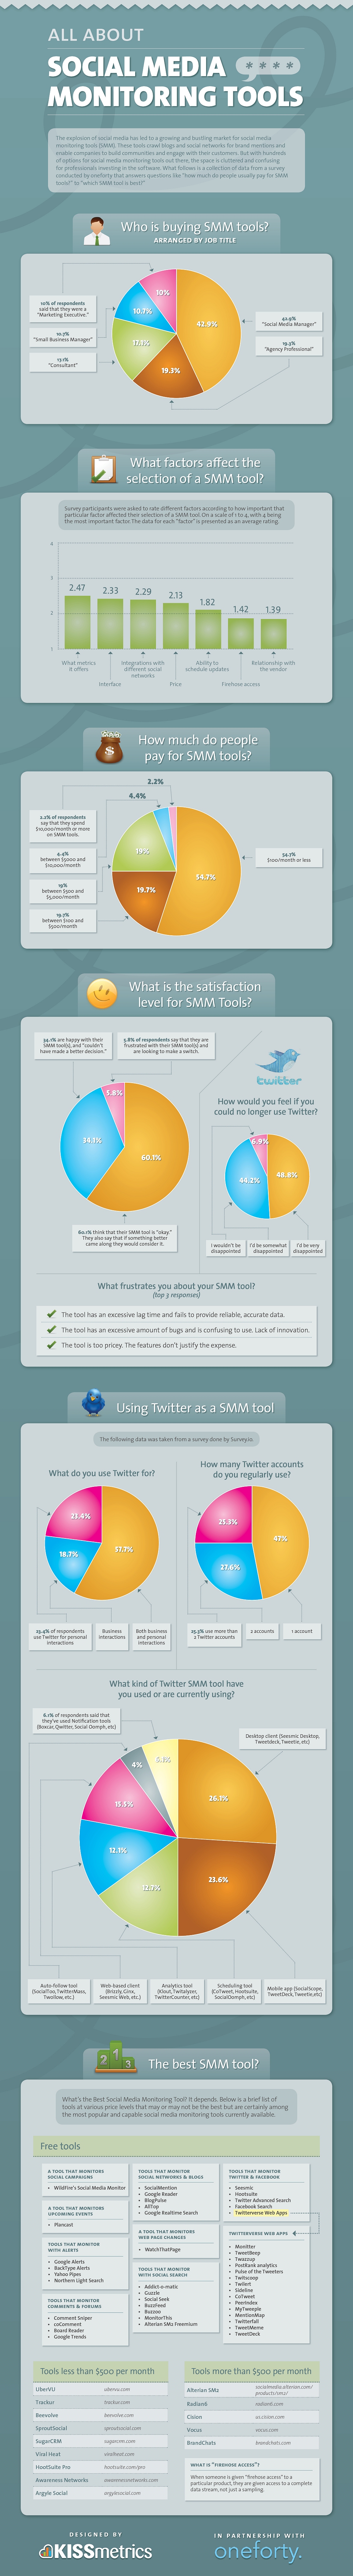 This infographic looks into who's buying social media monitoring tools, why they bought it, and how they're using it.